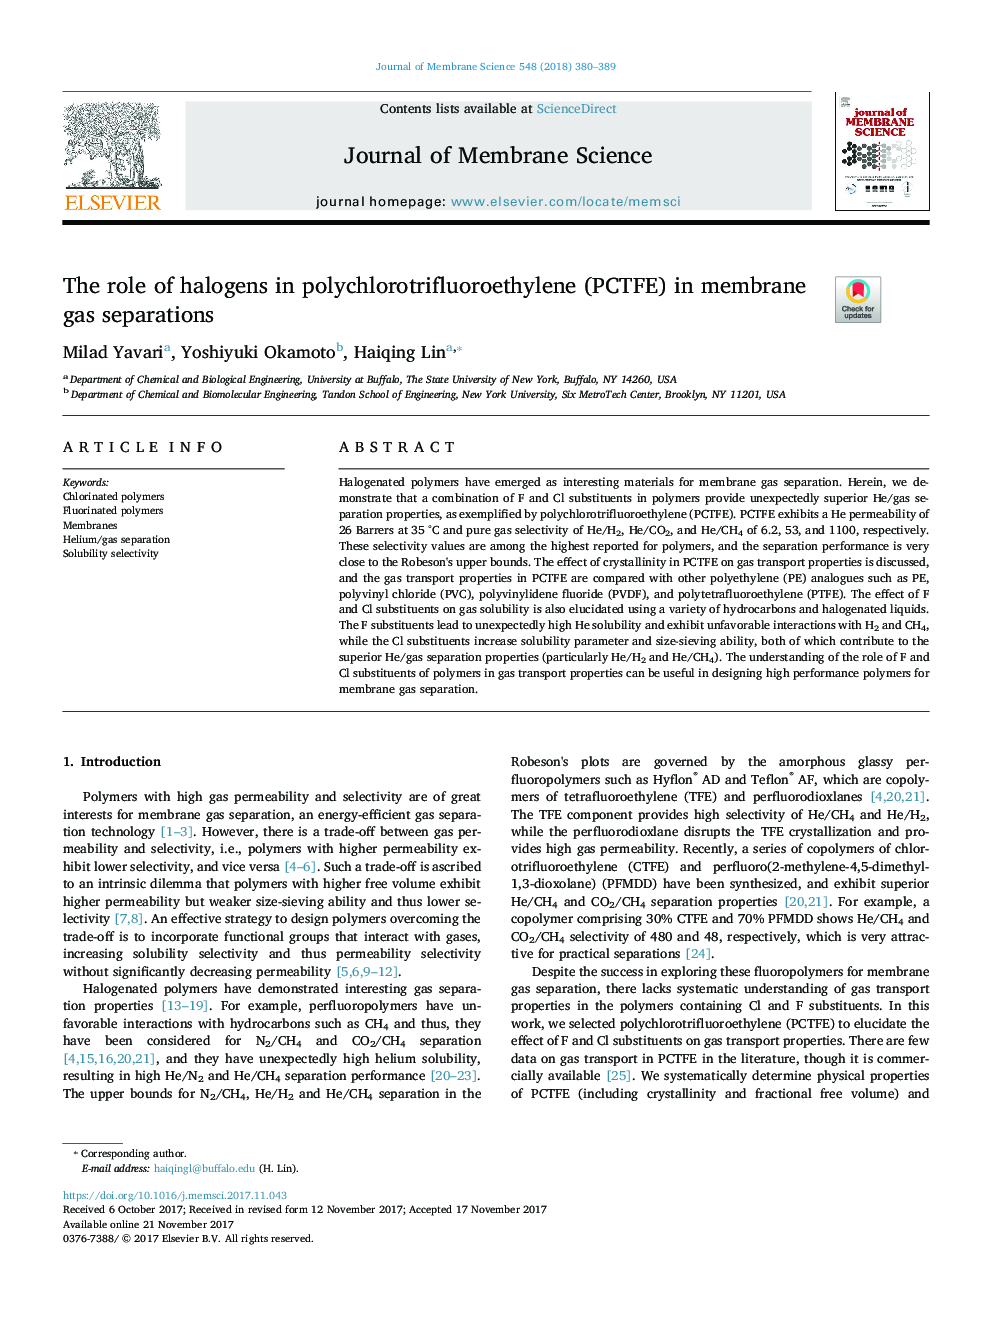 The role of halogens in polychlorotrifluoroethylene (PCTFE) in membrane gas separations